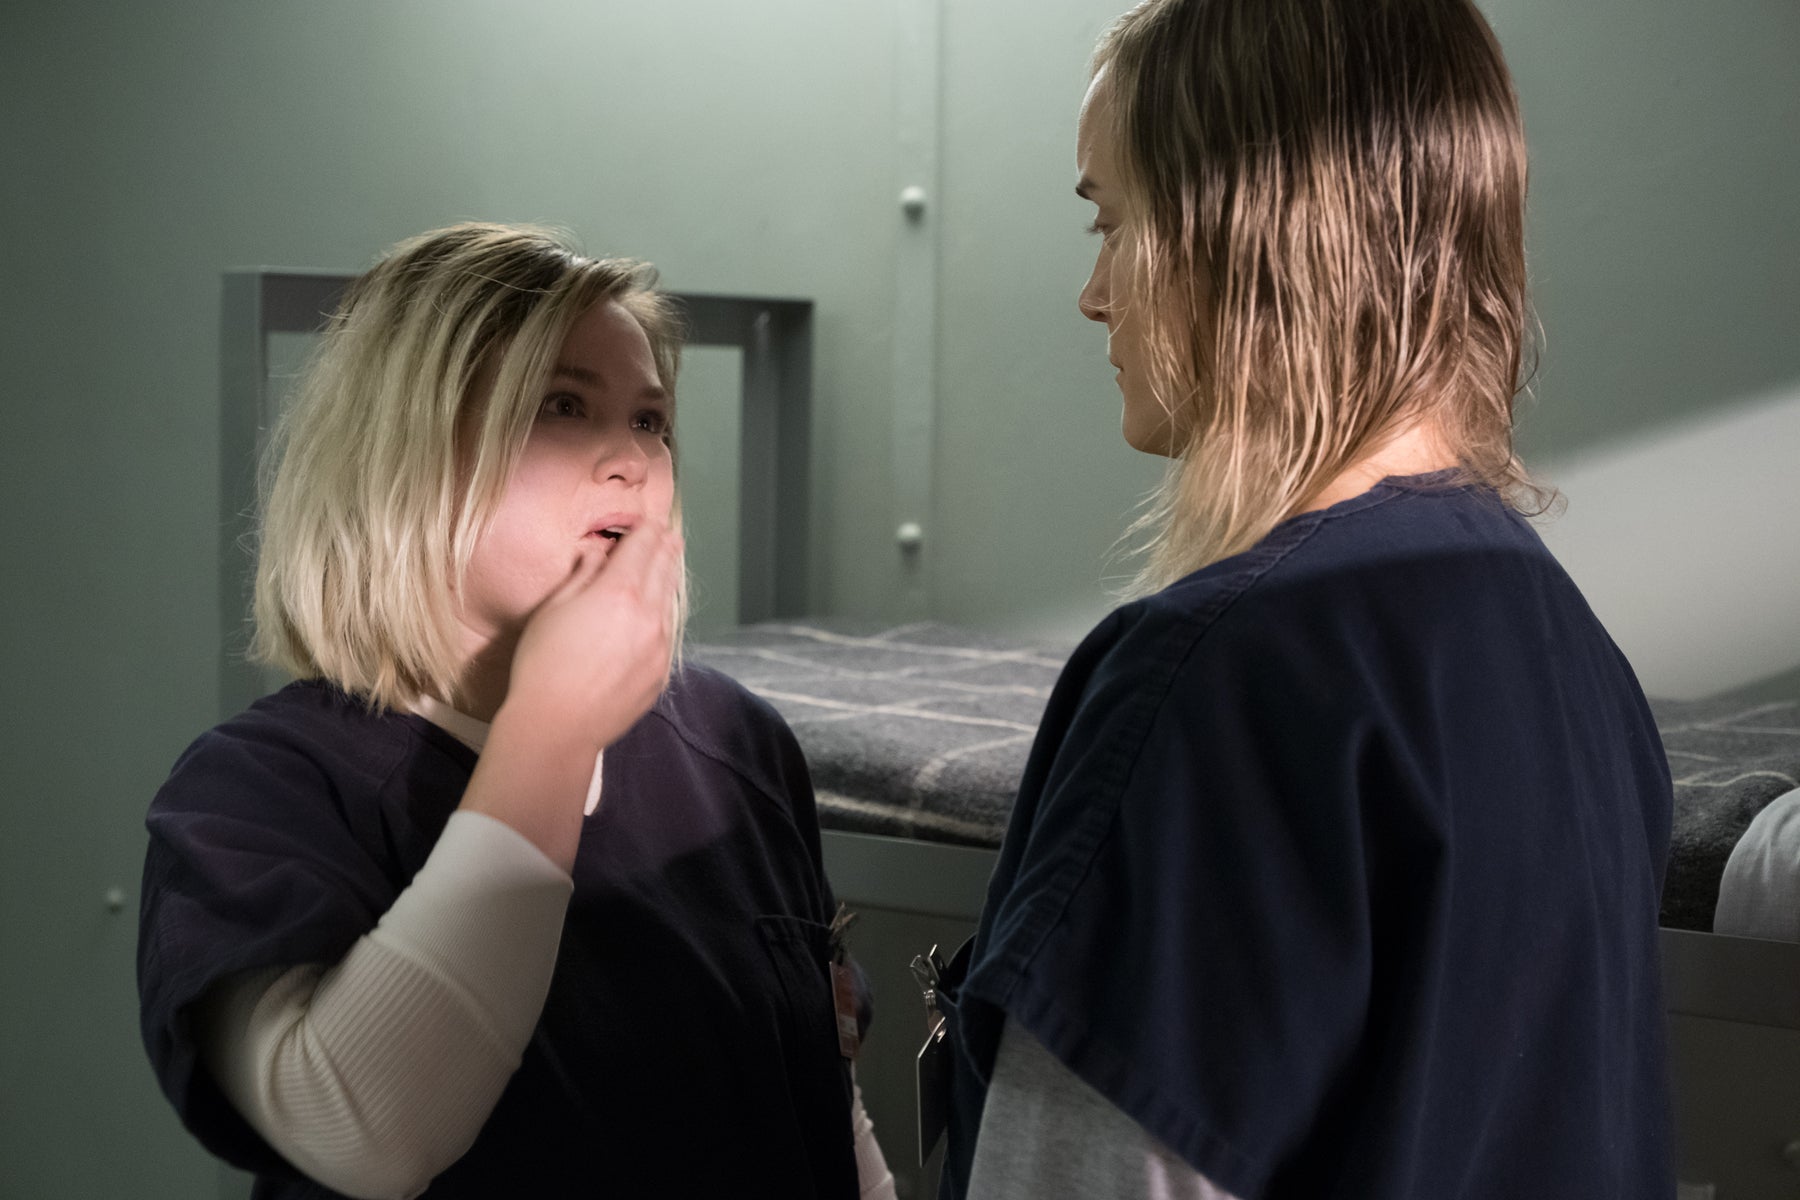 Madison Murphy speaks to Piper Chapman in an episode of Orange Is the New Black.